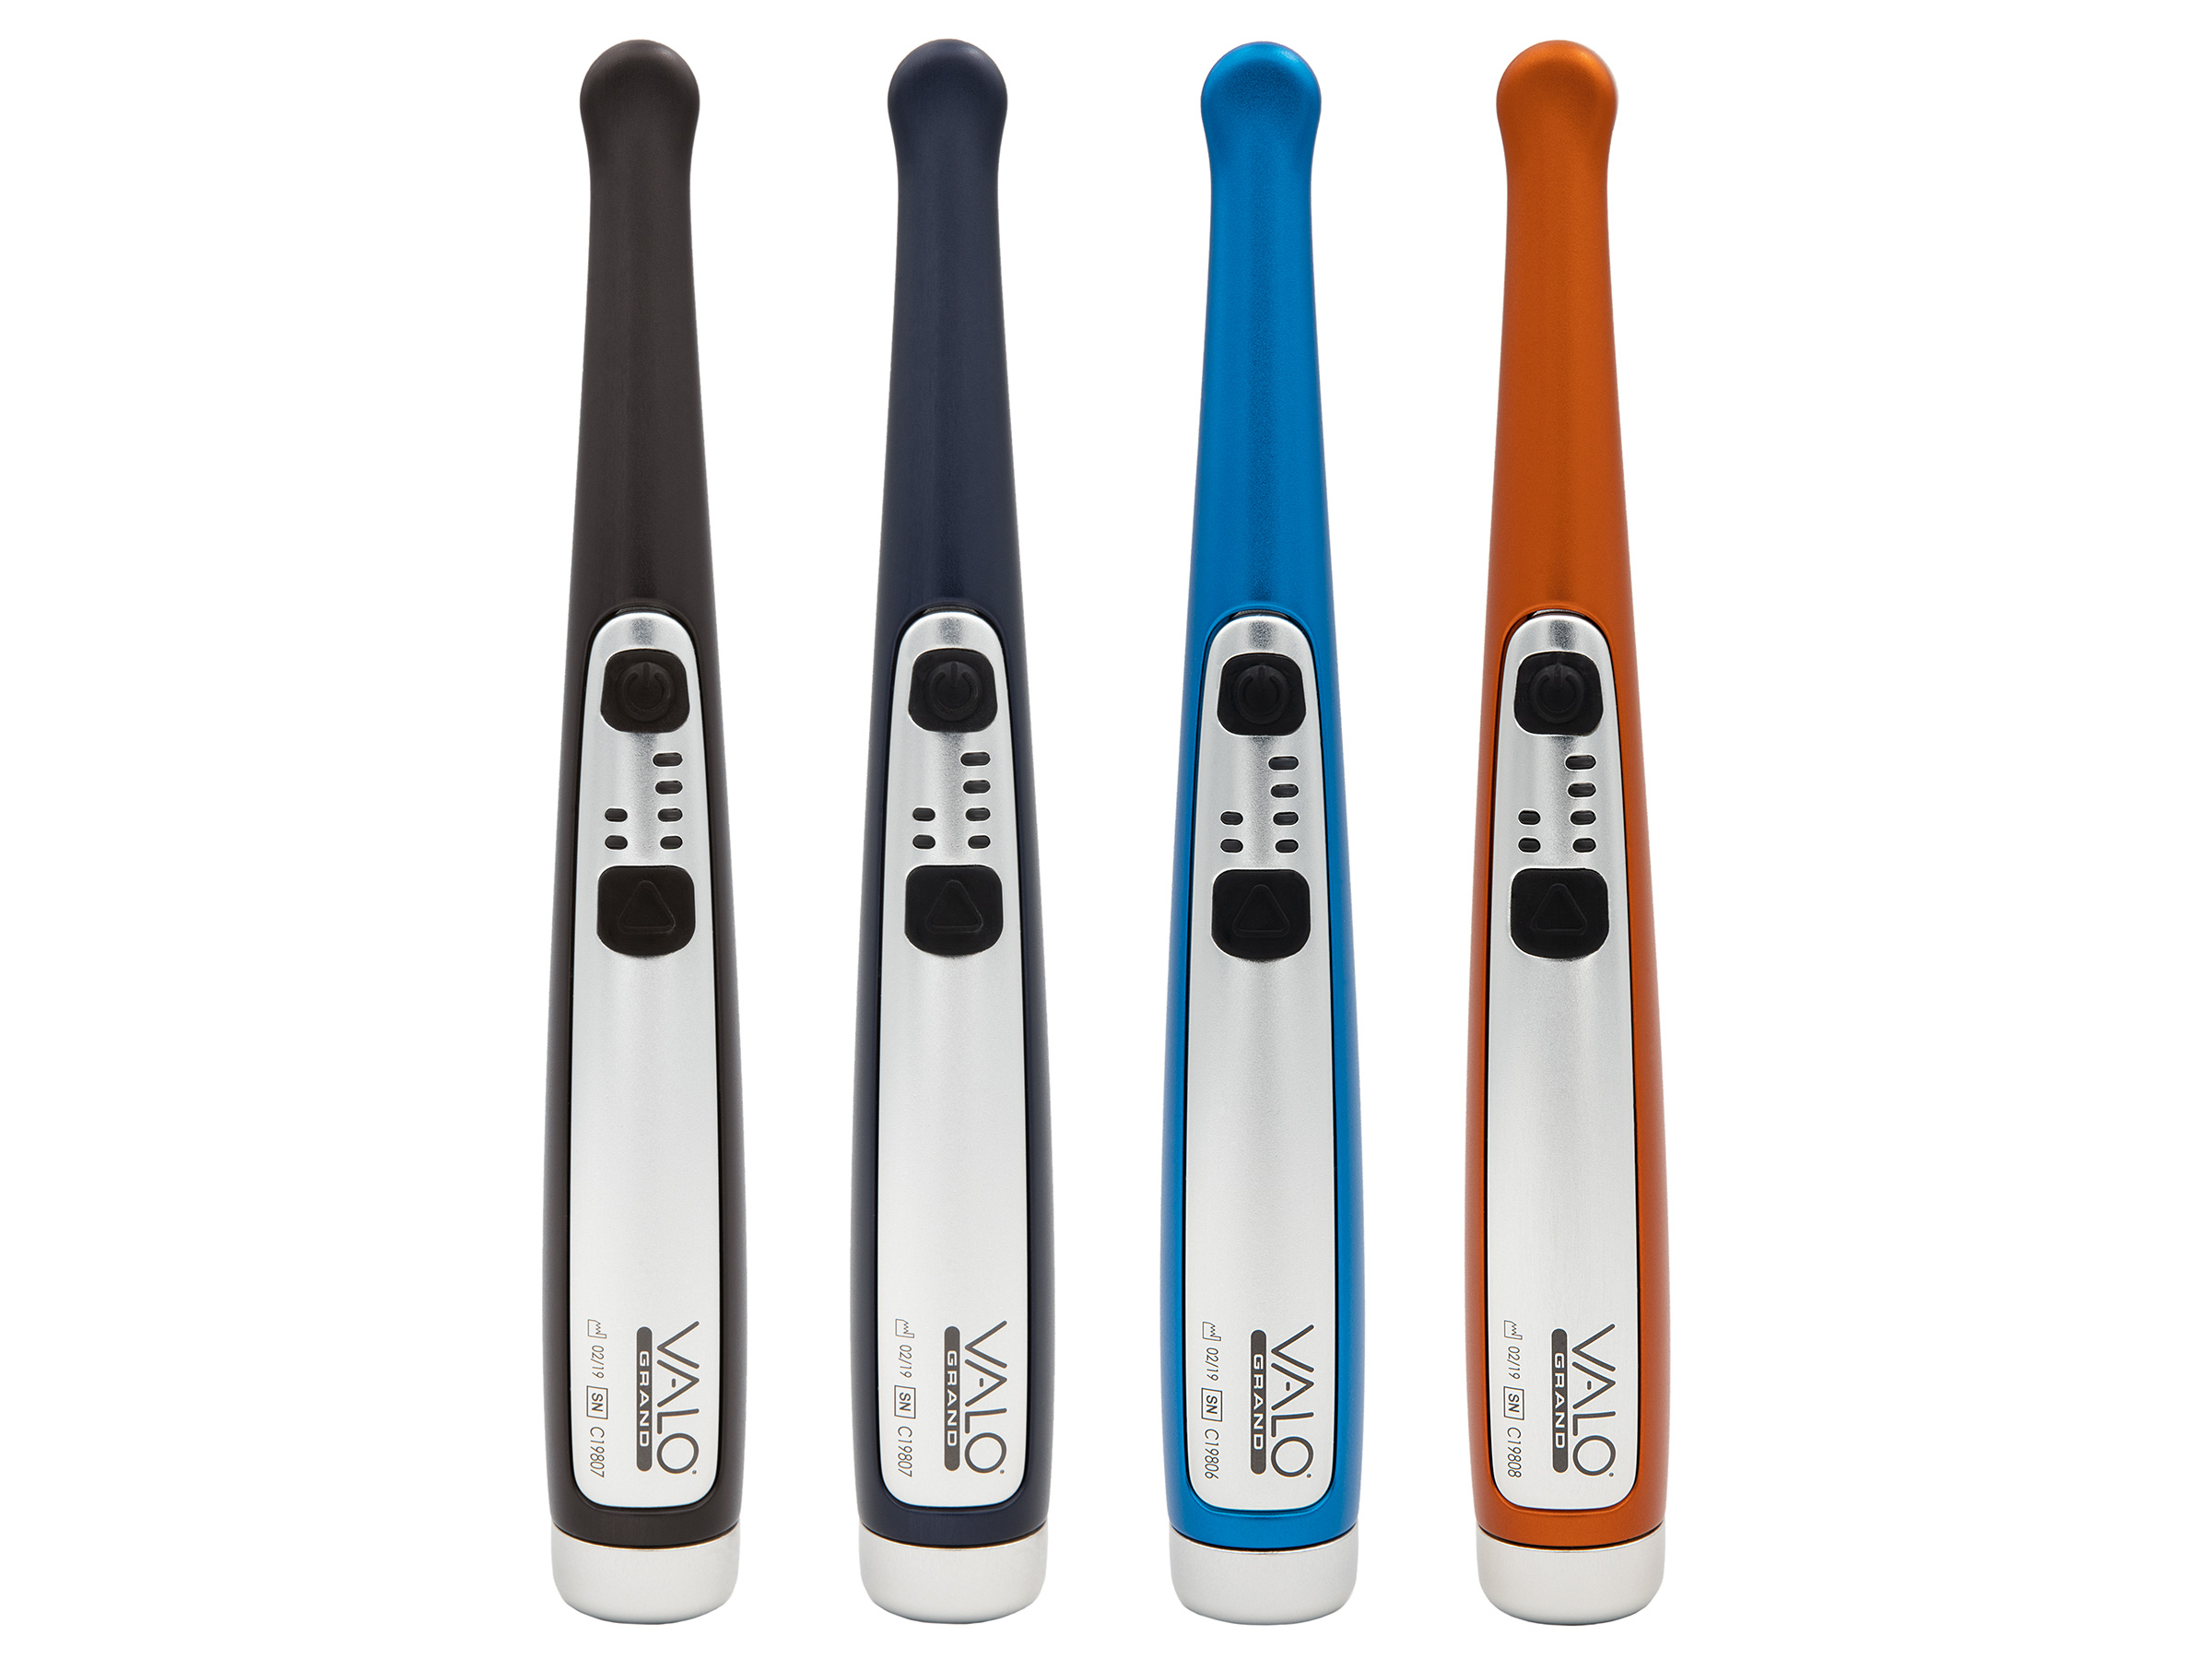 VALO™ Corded-LED Curing Light